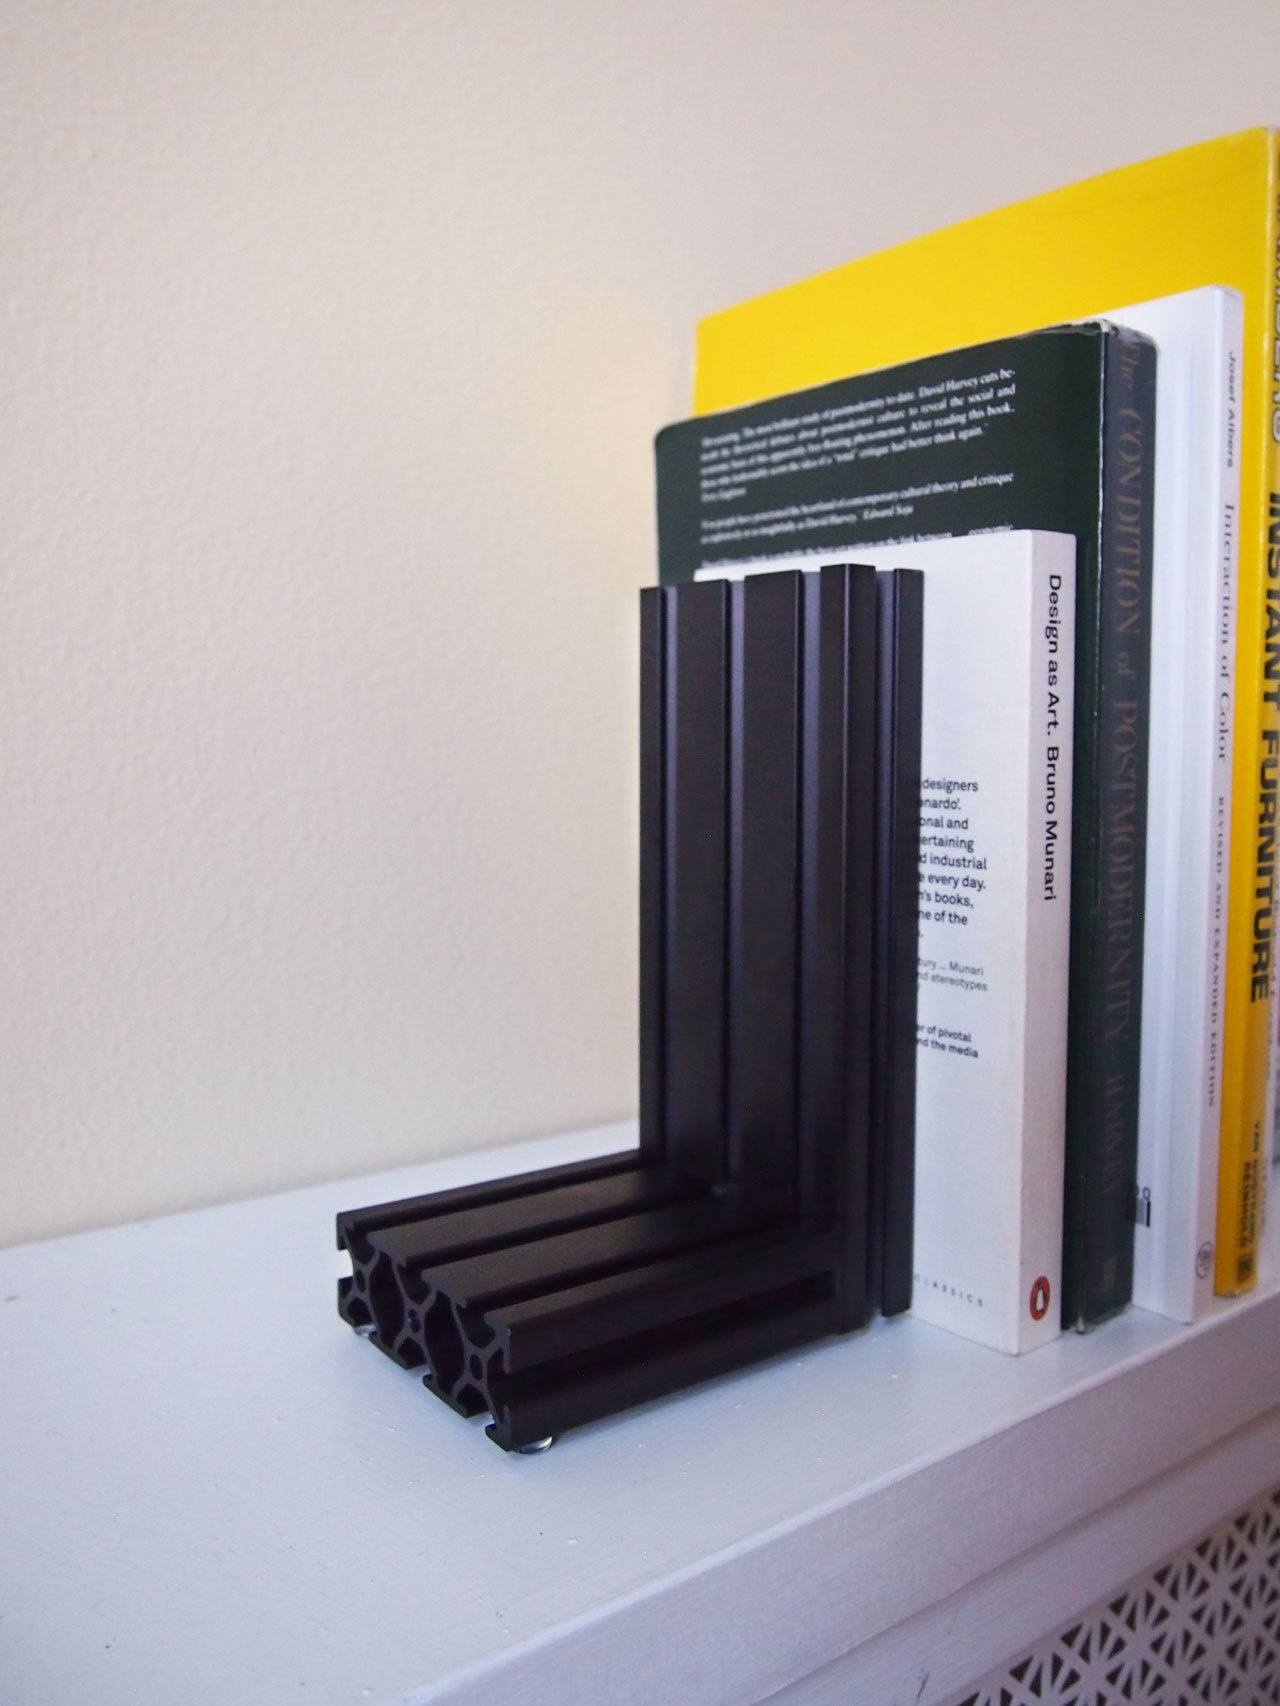 DIY extrusion bookends designed by Aandersson